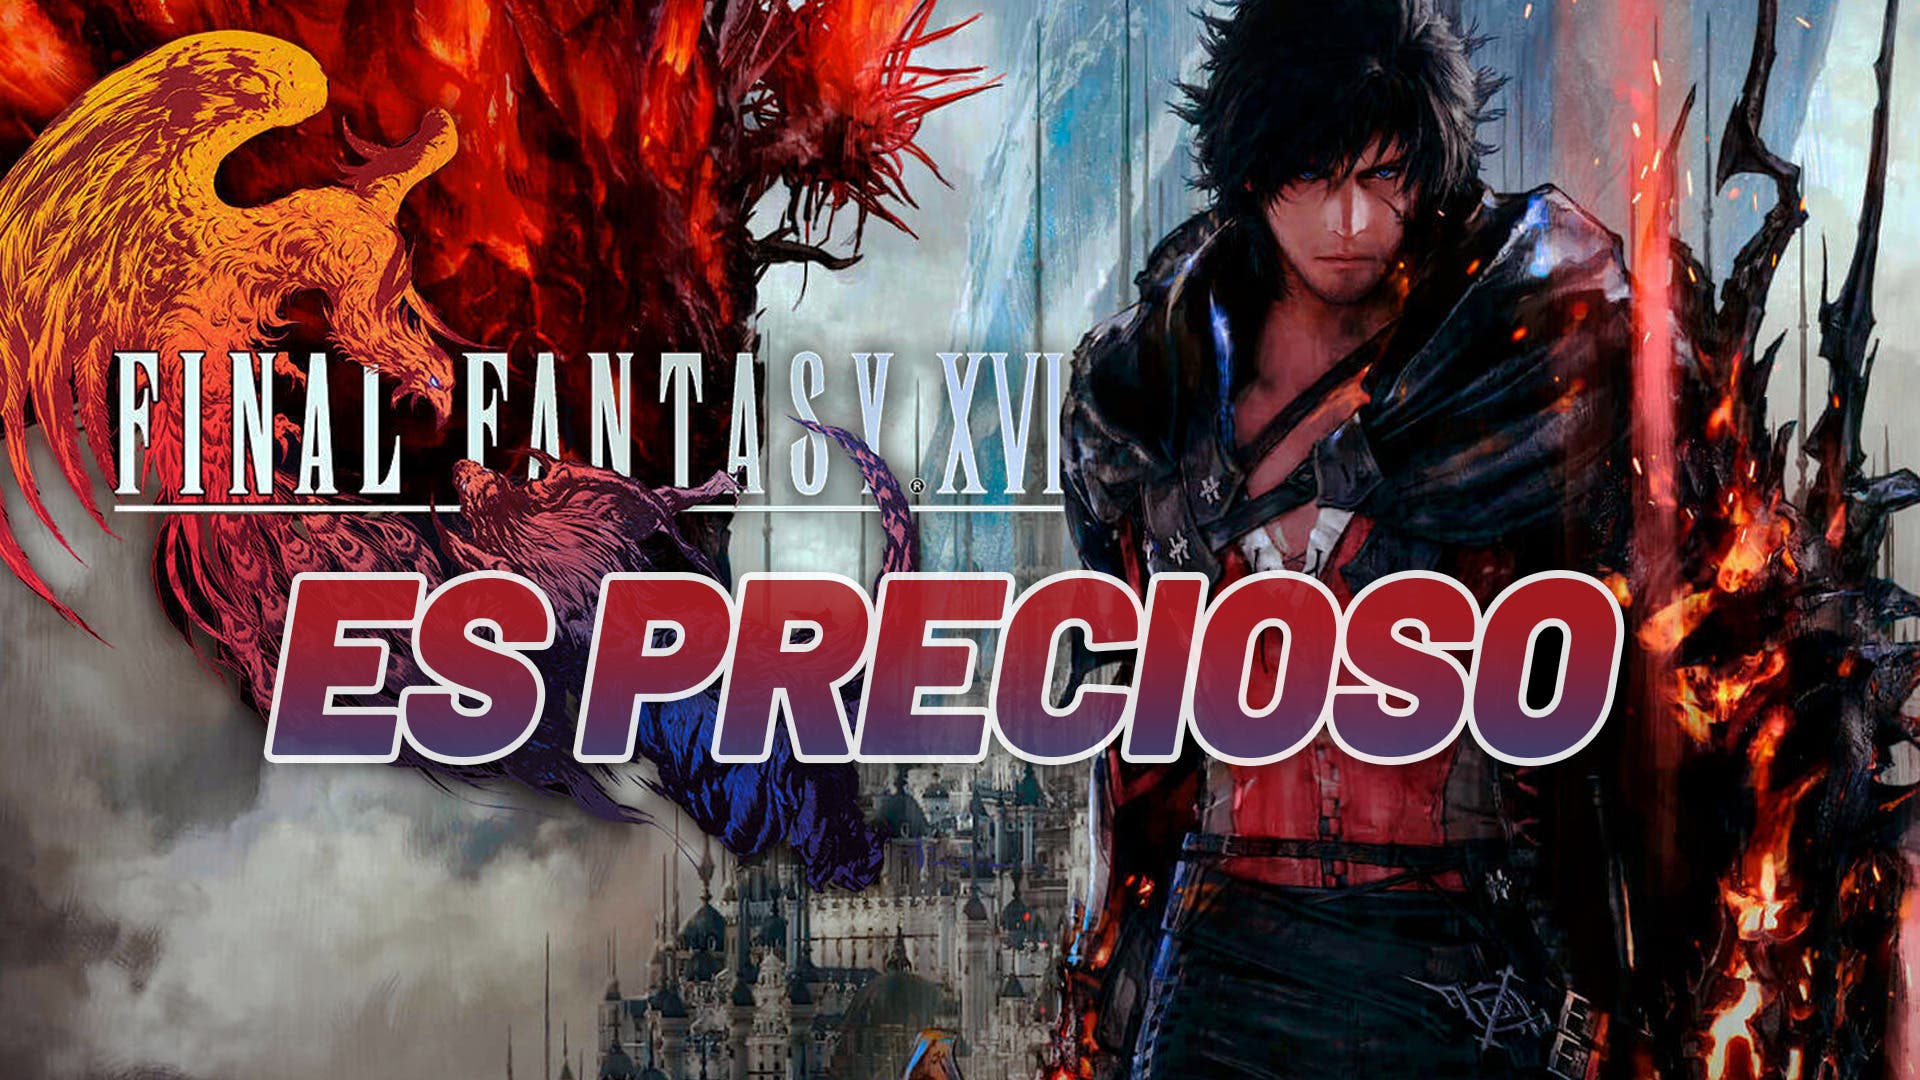 Final Fantasy XVI shows the spectacular world of Valisthea in a new video